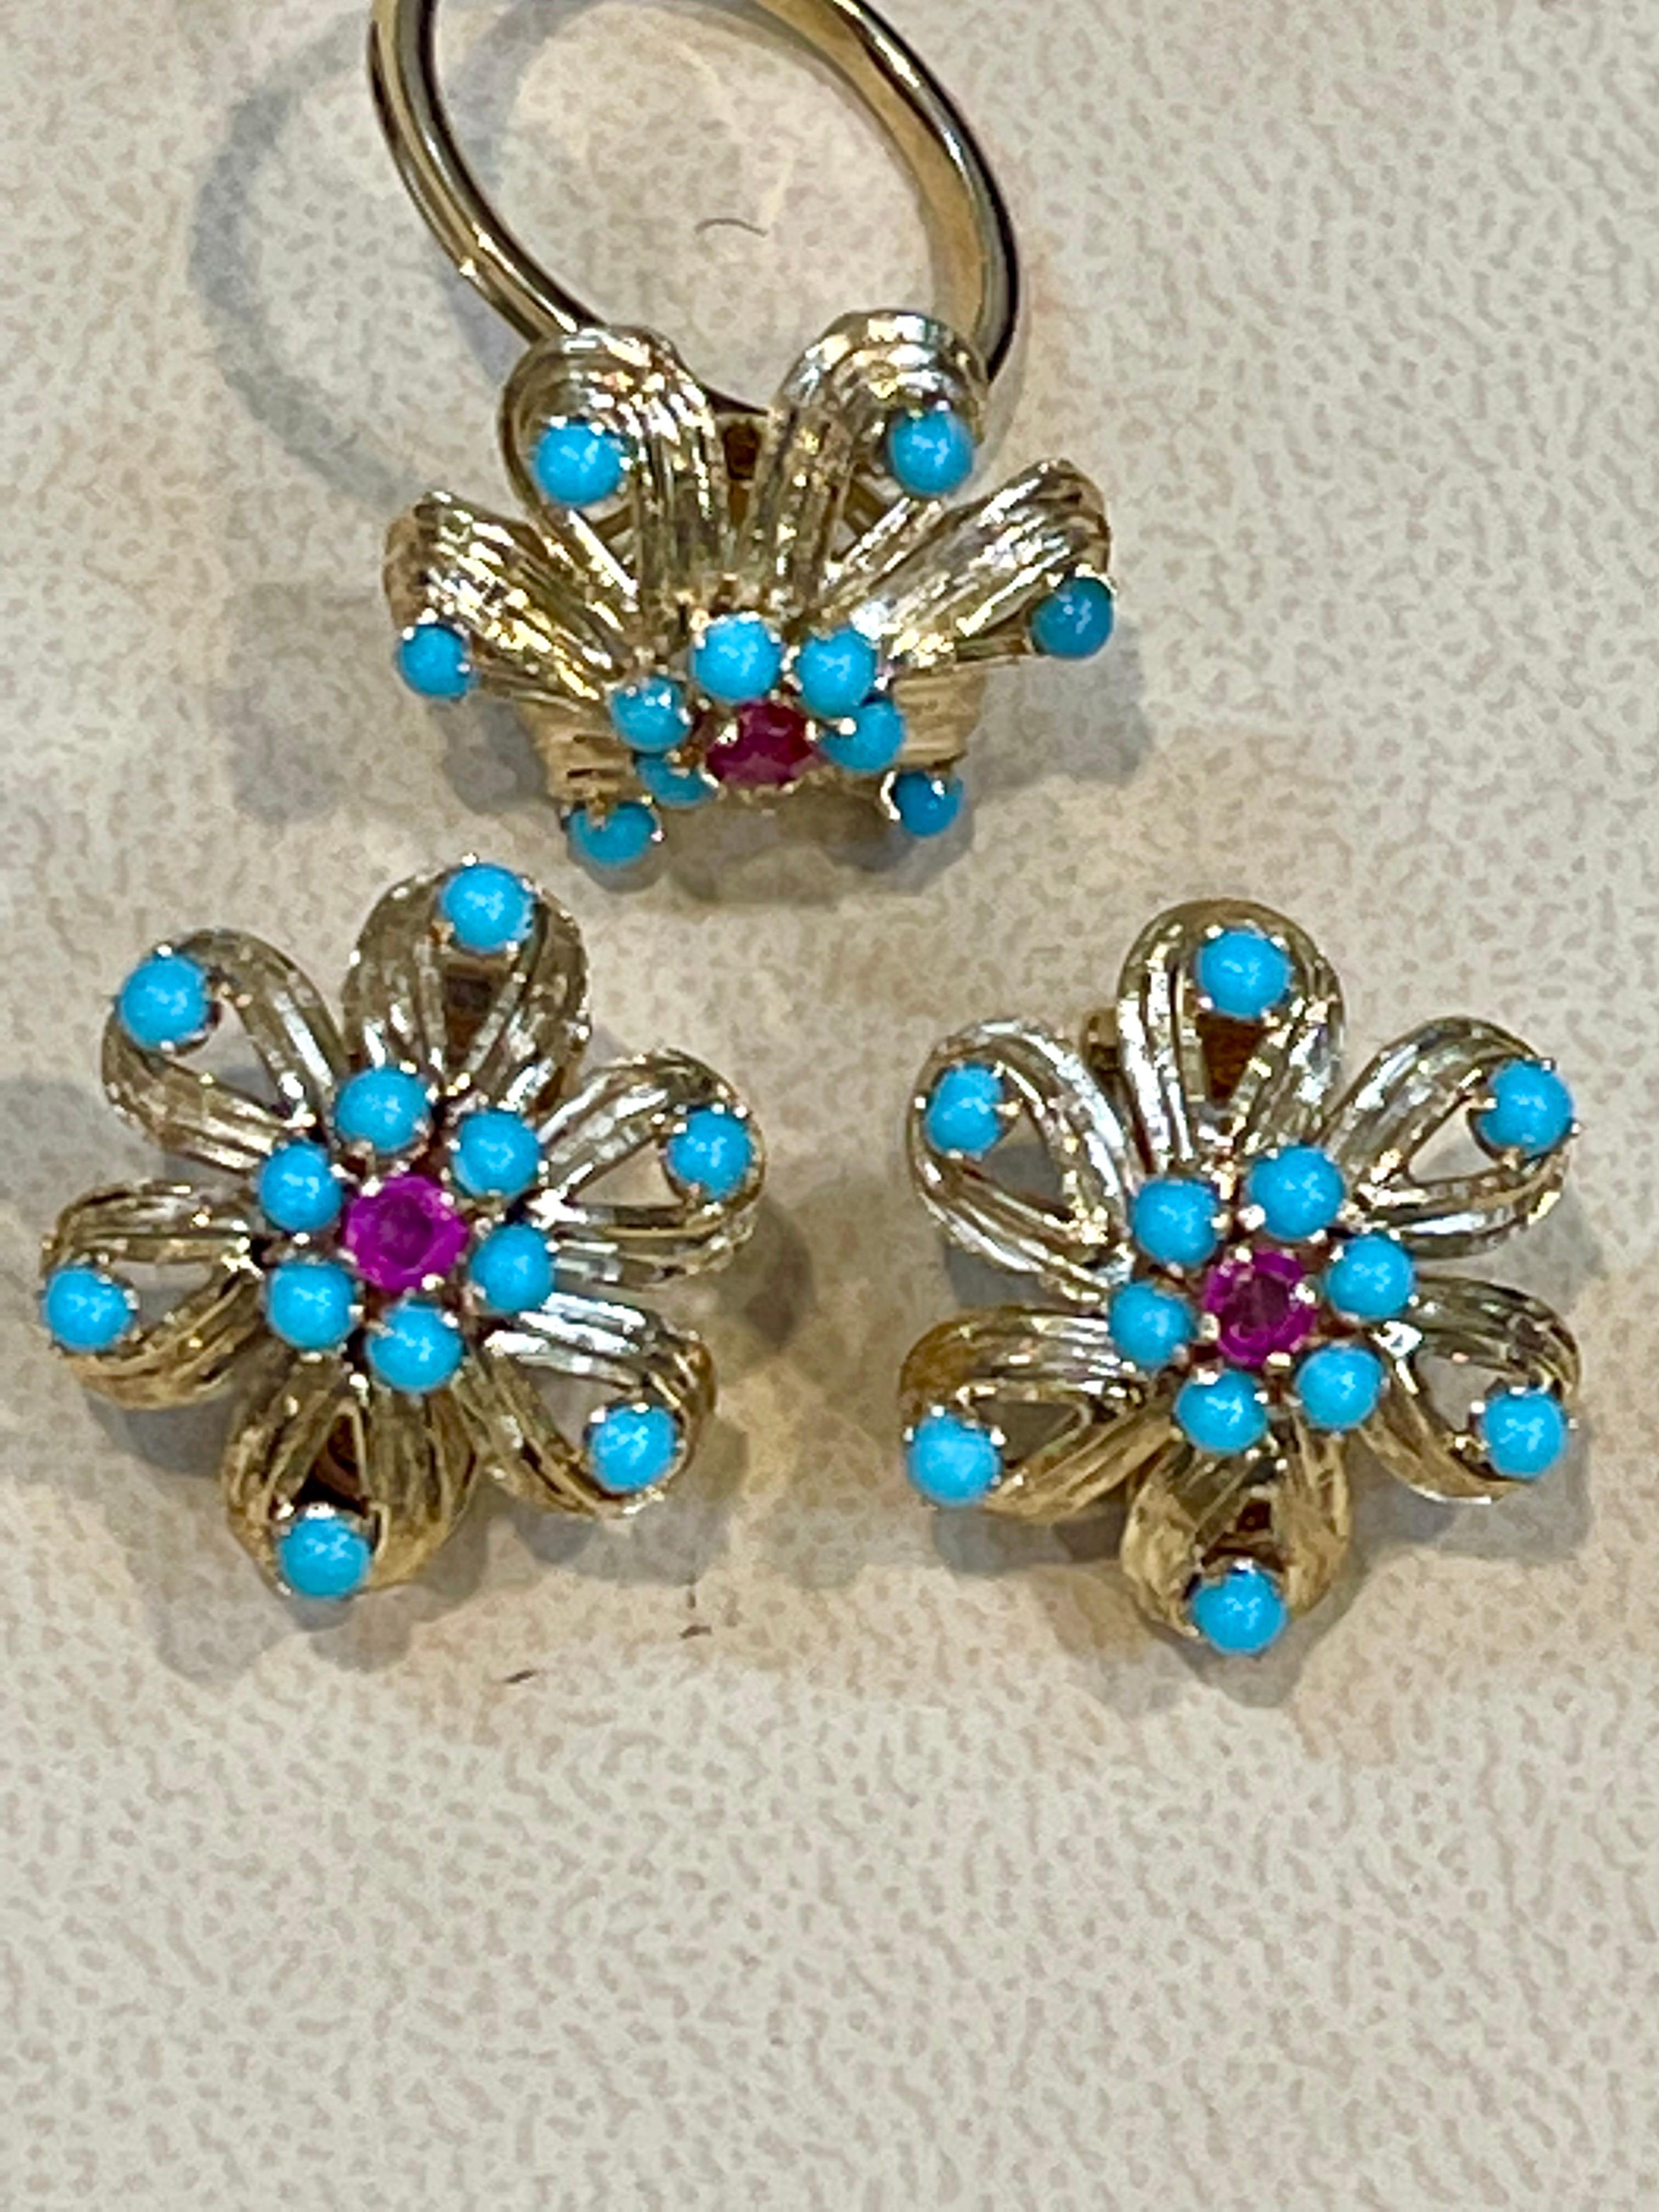 4 Ct Natural Turquoise & Ruby 18 Kt Yellow Gold Flower Ring & Earring Set 20Gm For Sale 7